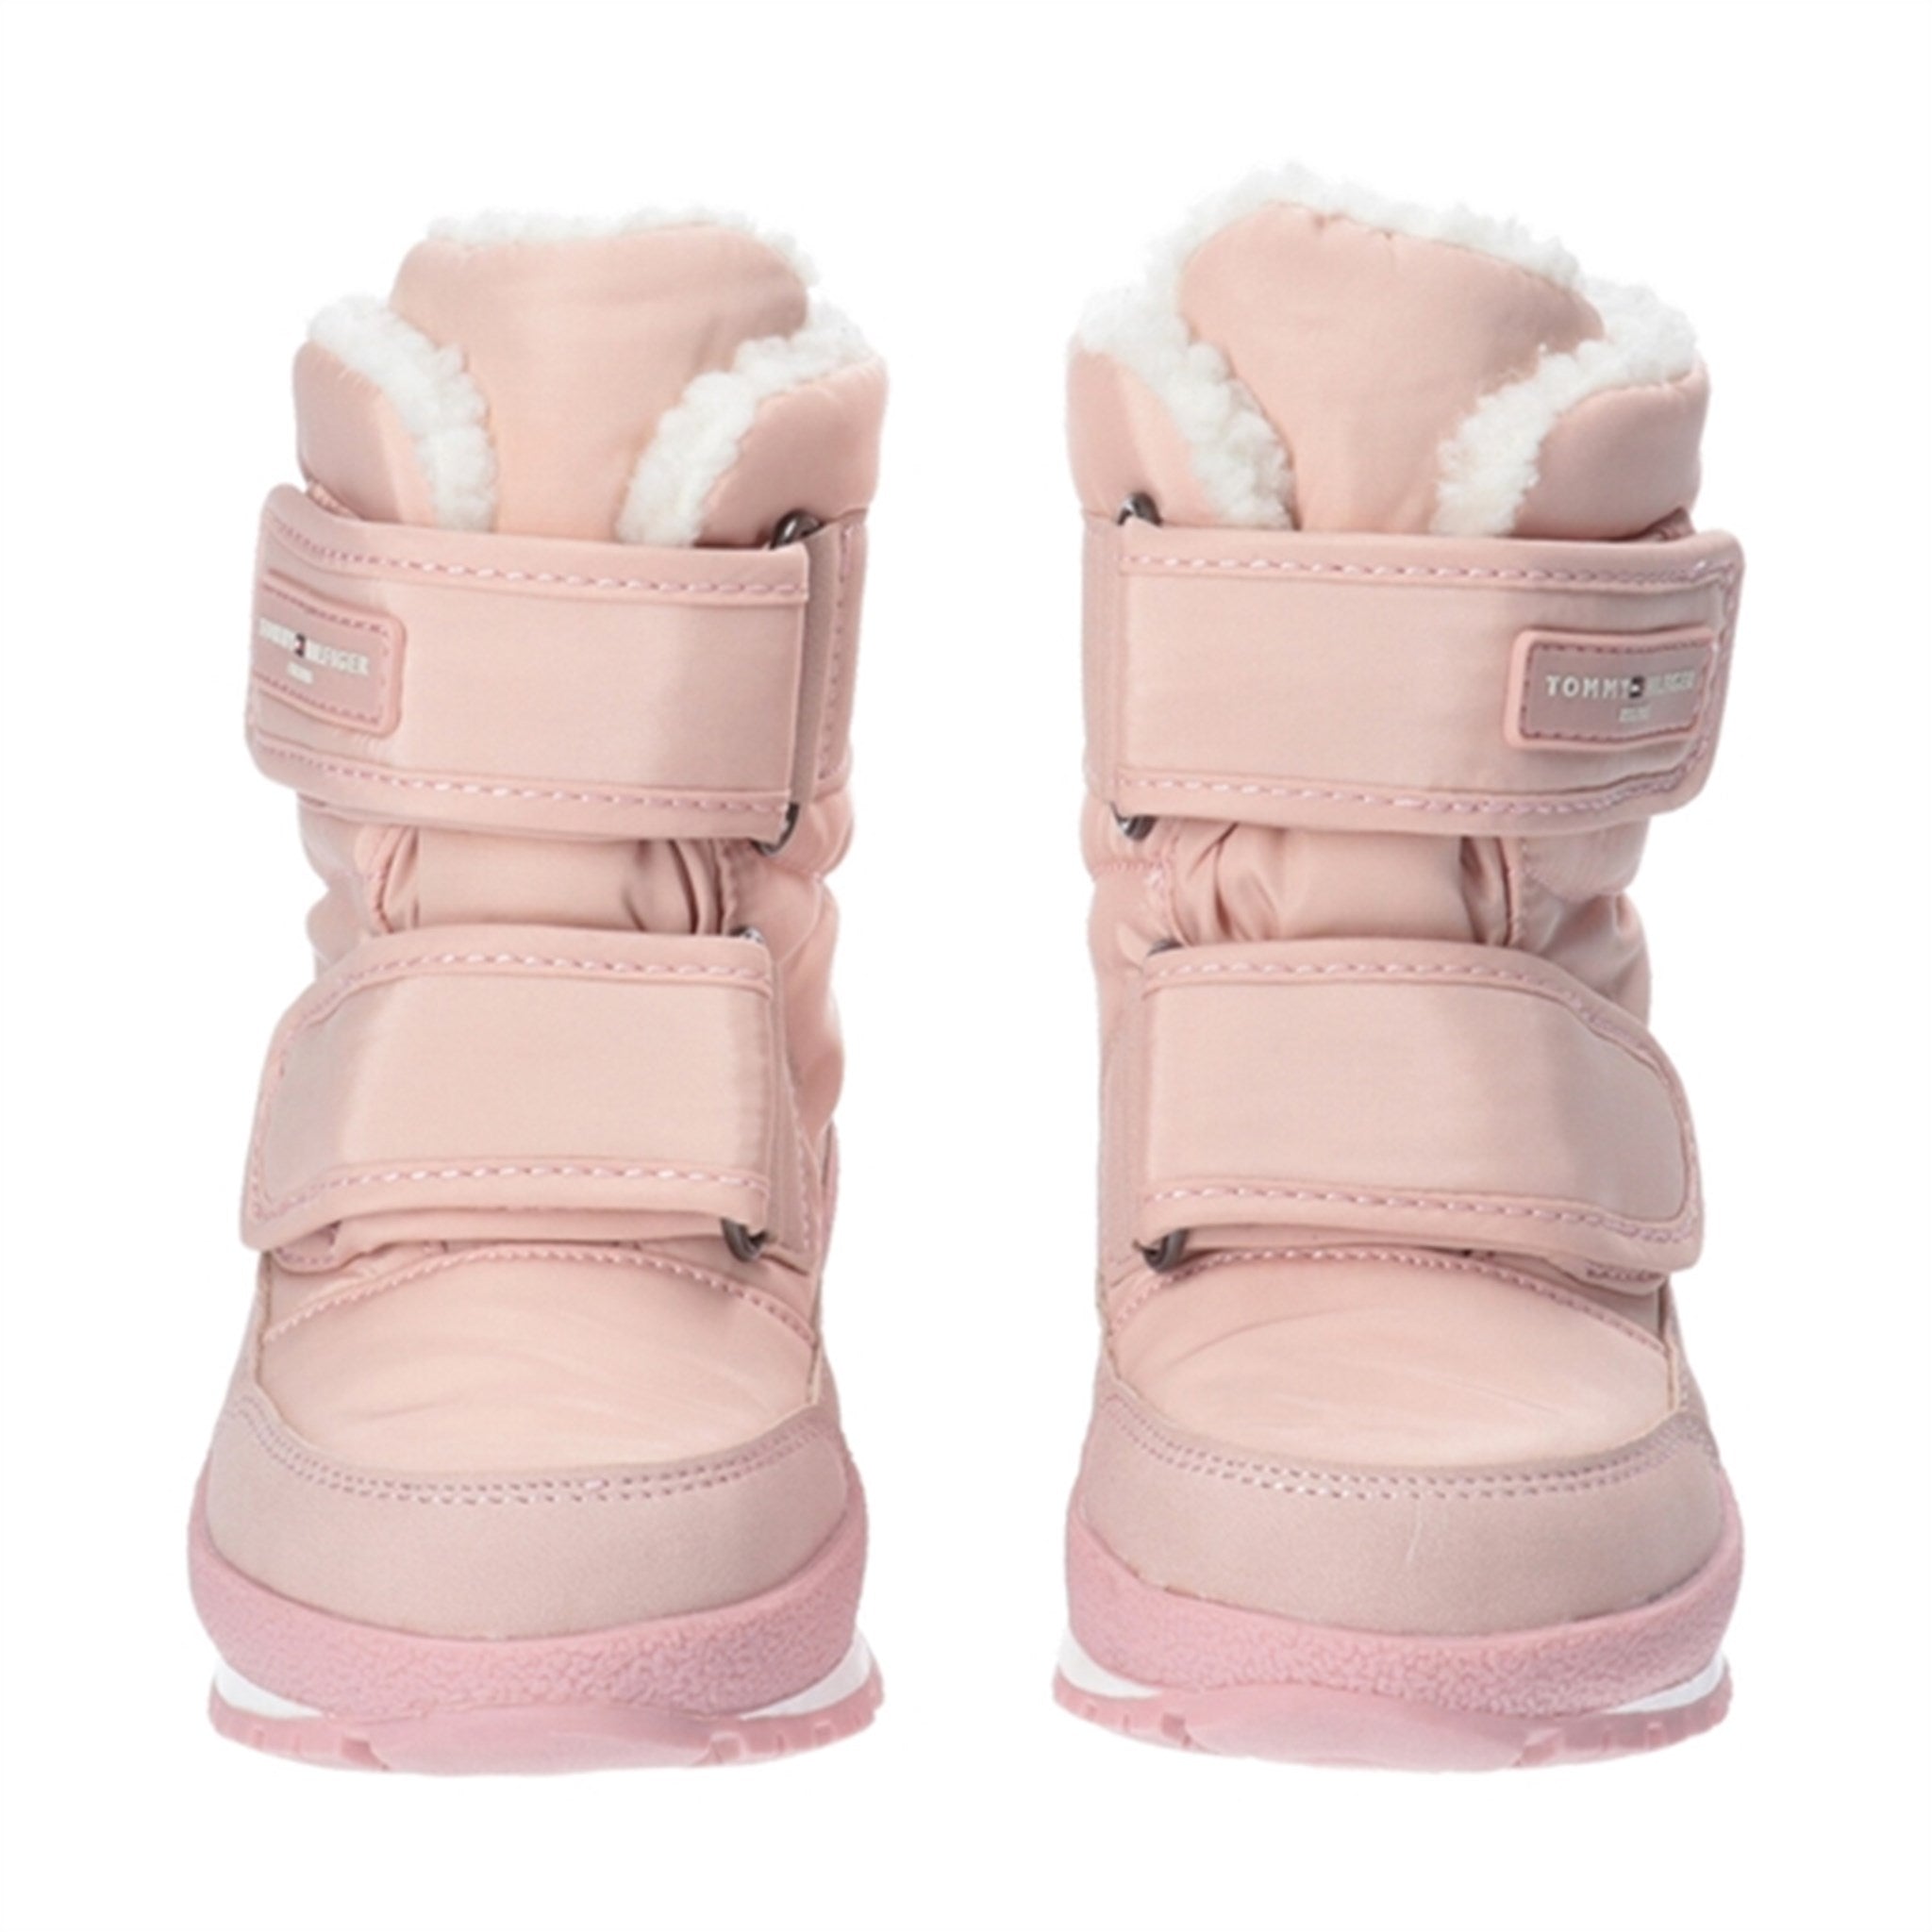 Tommy Hilfiger Snow Boot Pink 2